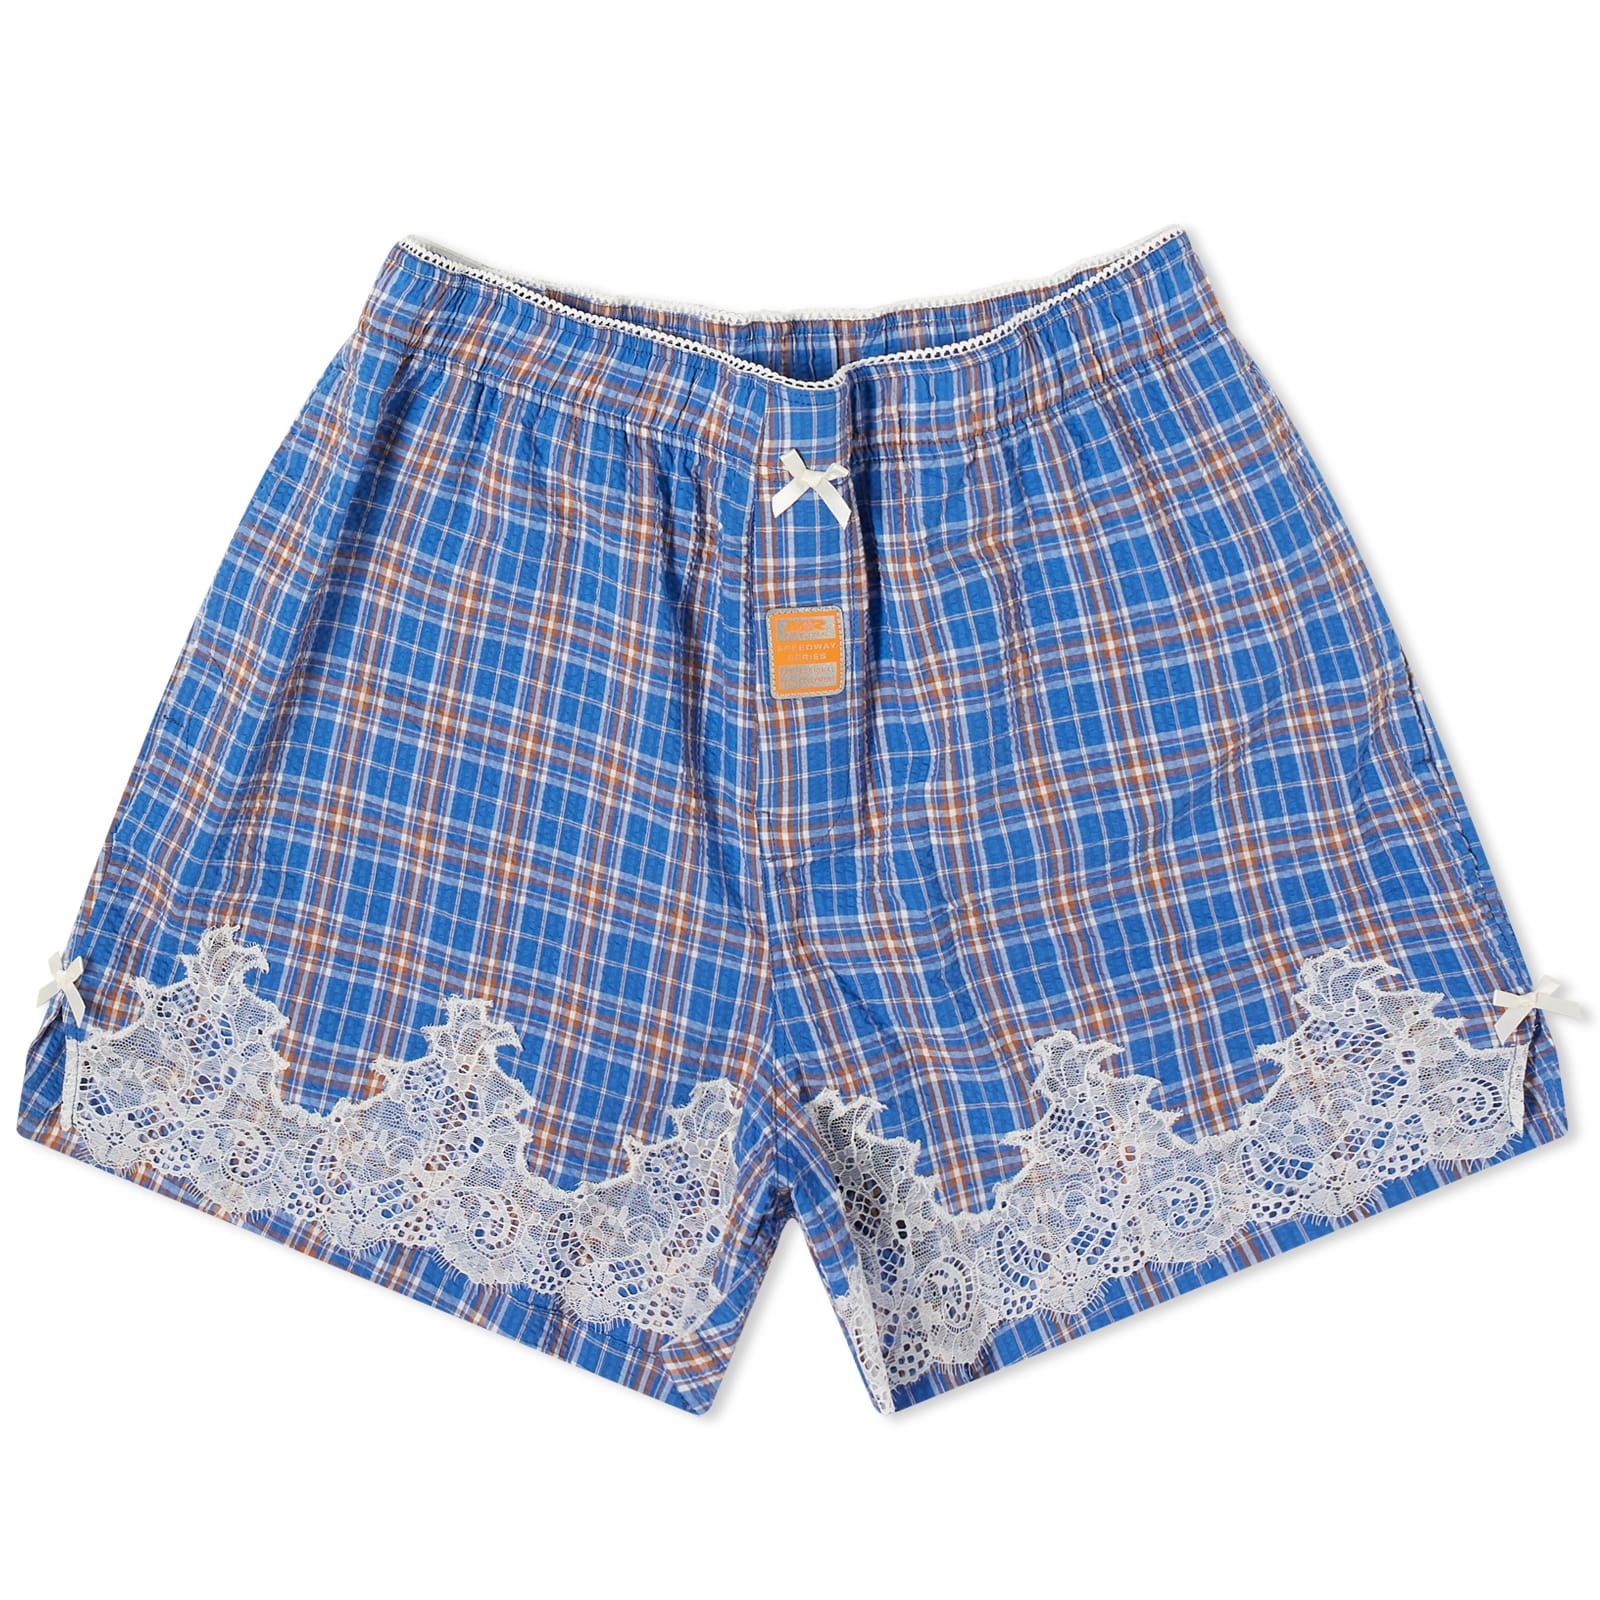 Martine Rose French Knicker Boxer Shorts - 1